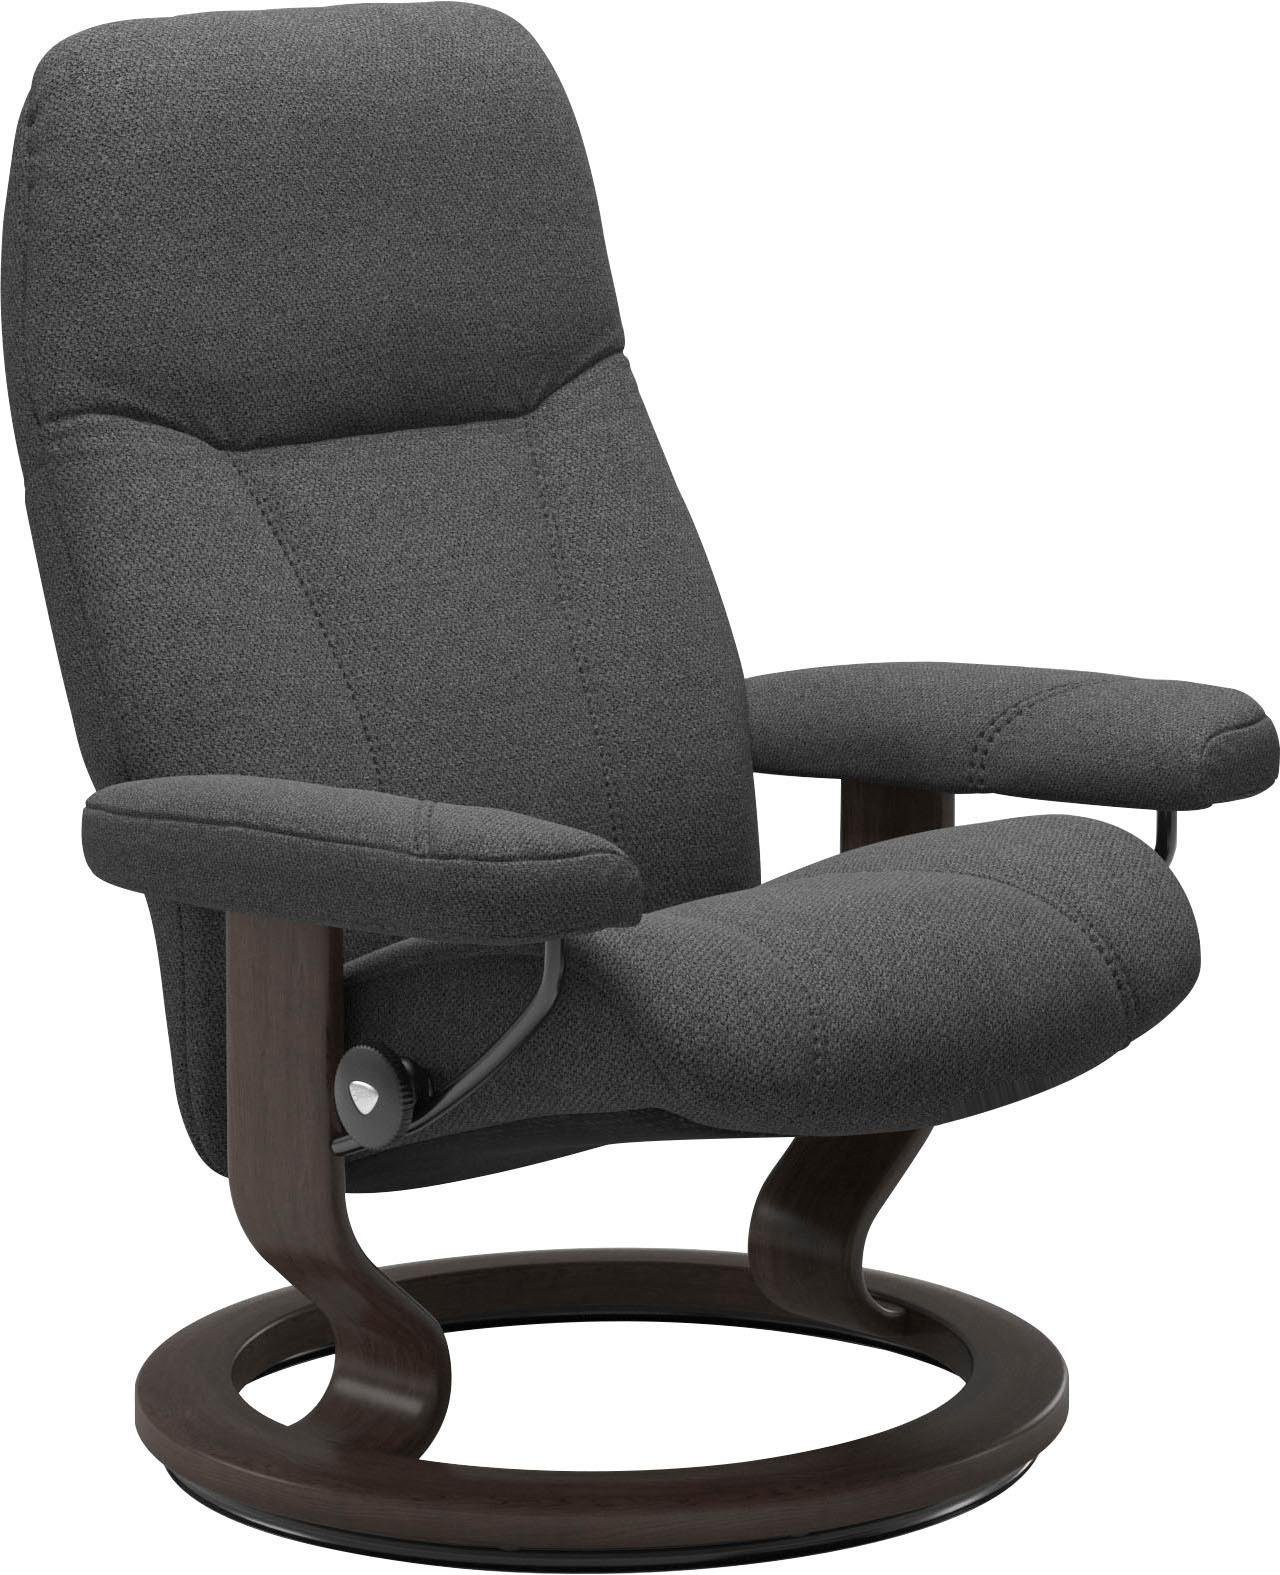 Base, mit Consul, Gestell Stressless® Classic Wenge Größe Relaxsessel S,